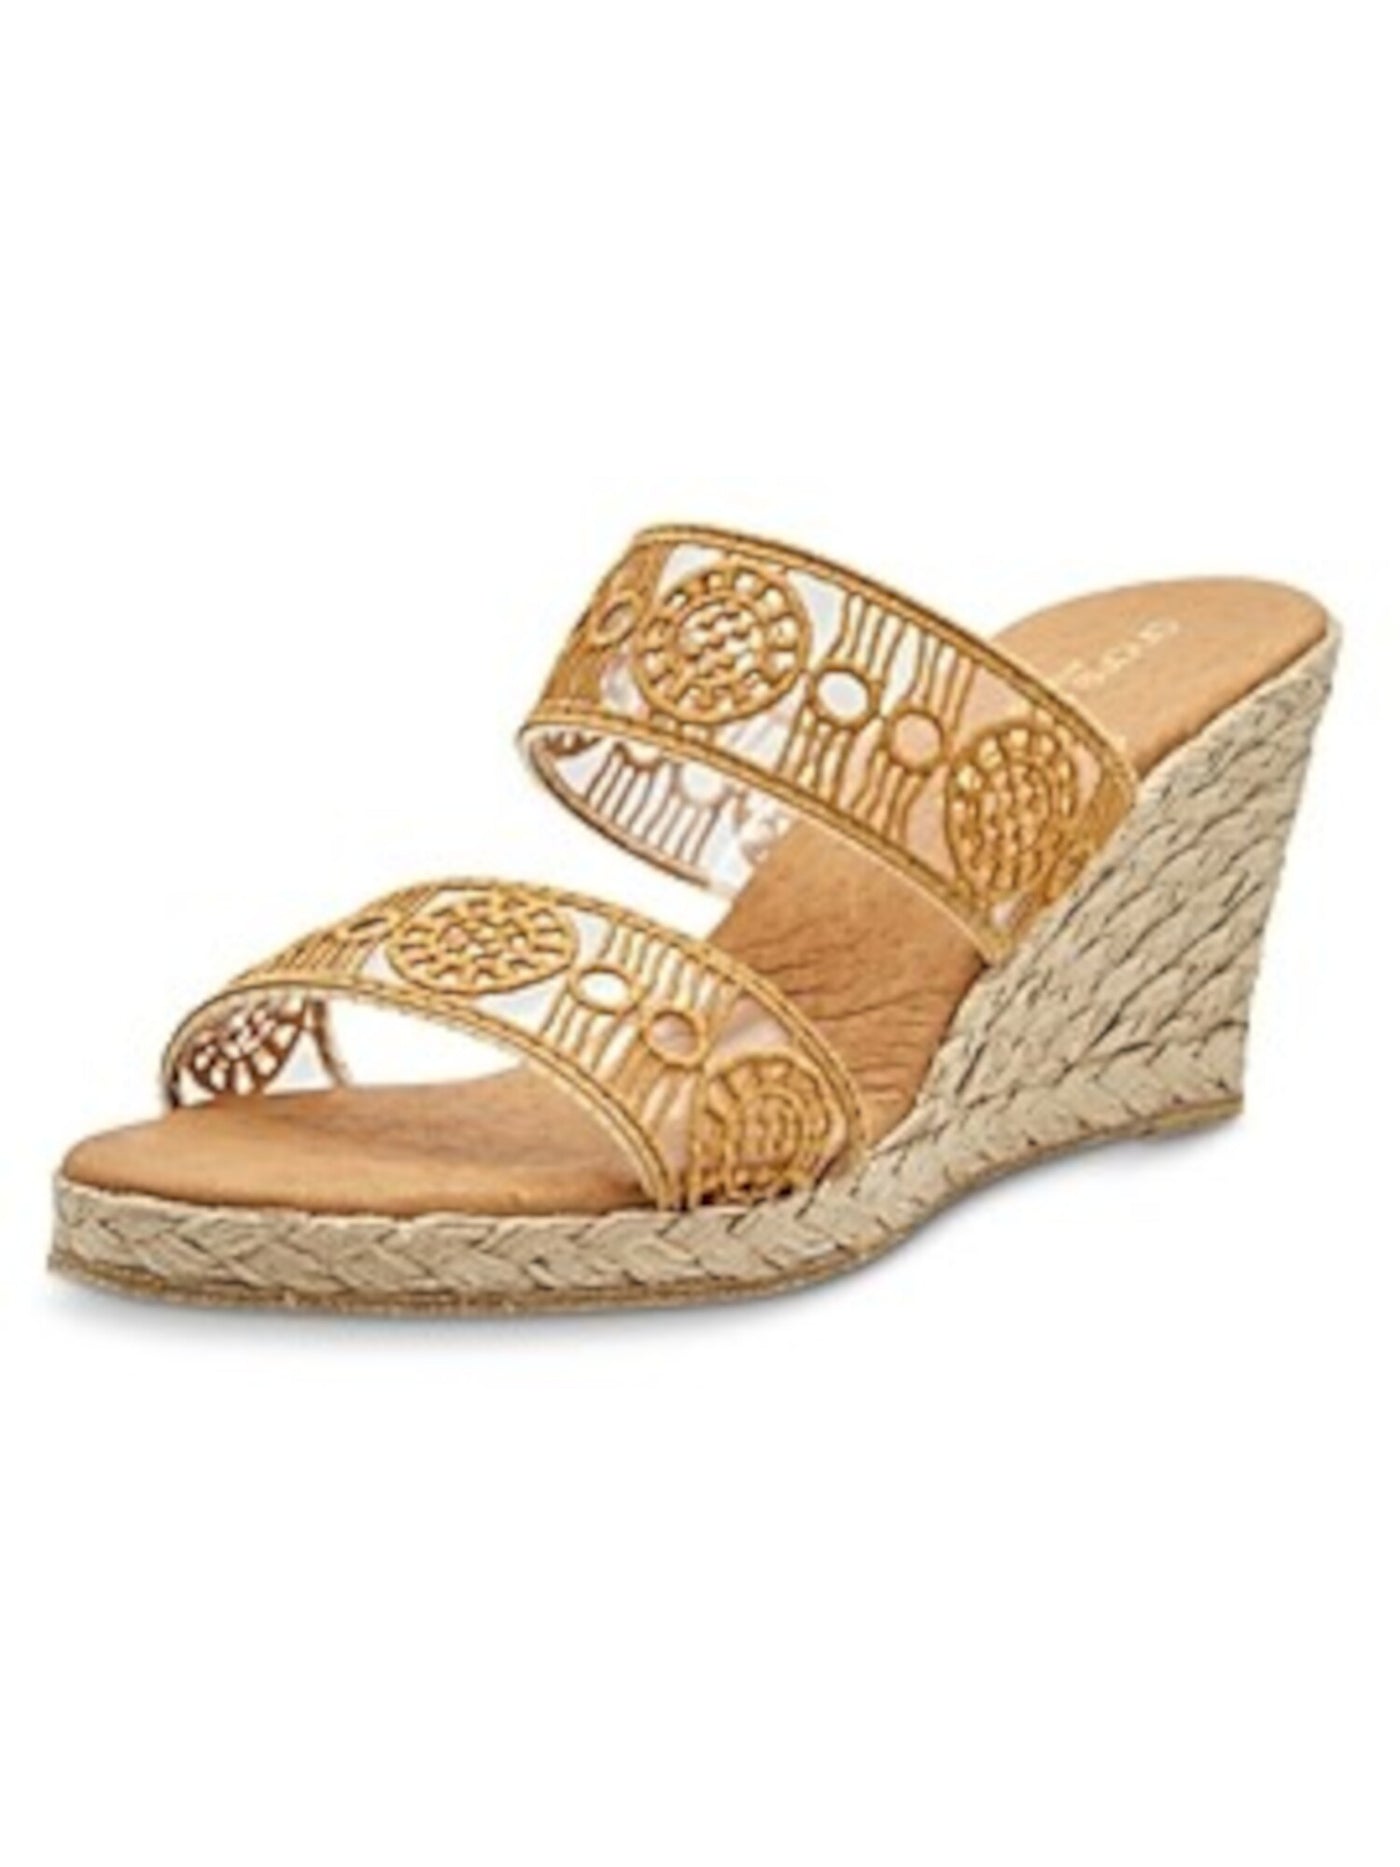 ANDRE ASSOUS Womens Gold Geometric Double Band1" Platform Embroidered Padded Anja Round Toe Wedge Slip On Leather Dress Espadrille Shoes 41